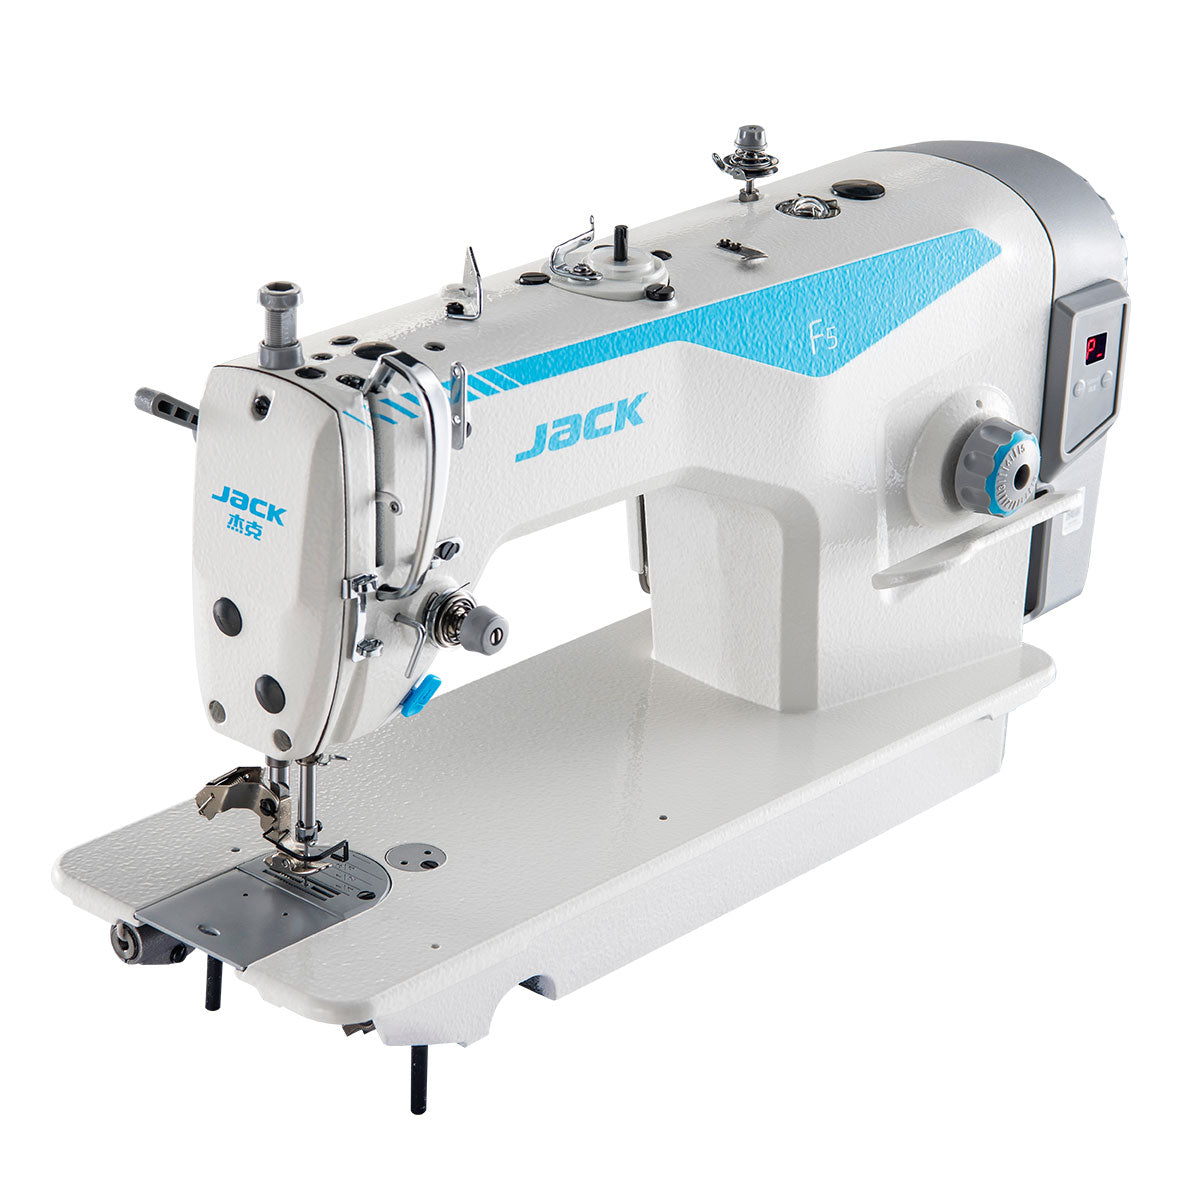 JACK F5 Single Needle Direct Drive Lockstitch Industrial Sewing Machine Assembled with Table and Stand Included